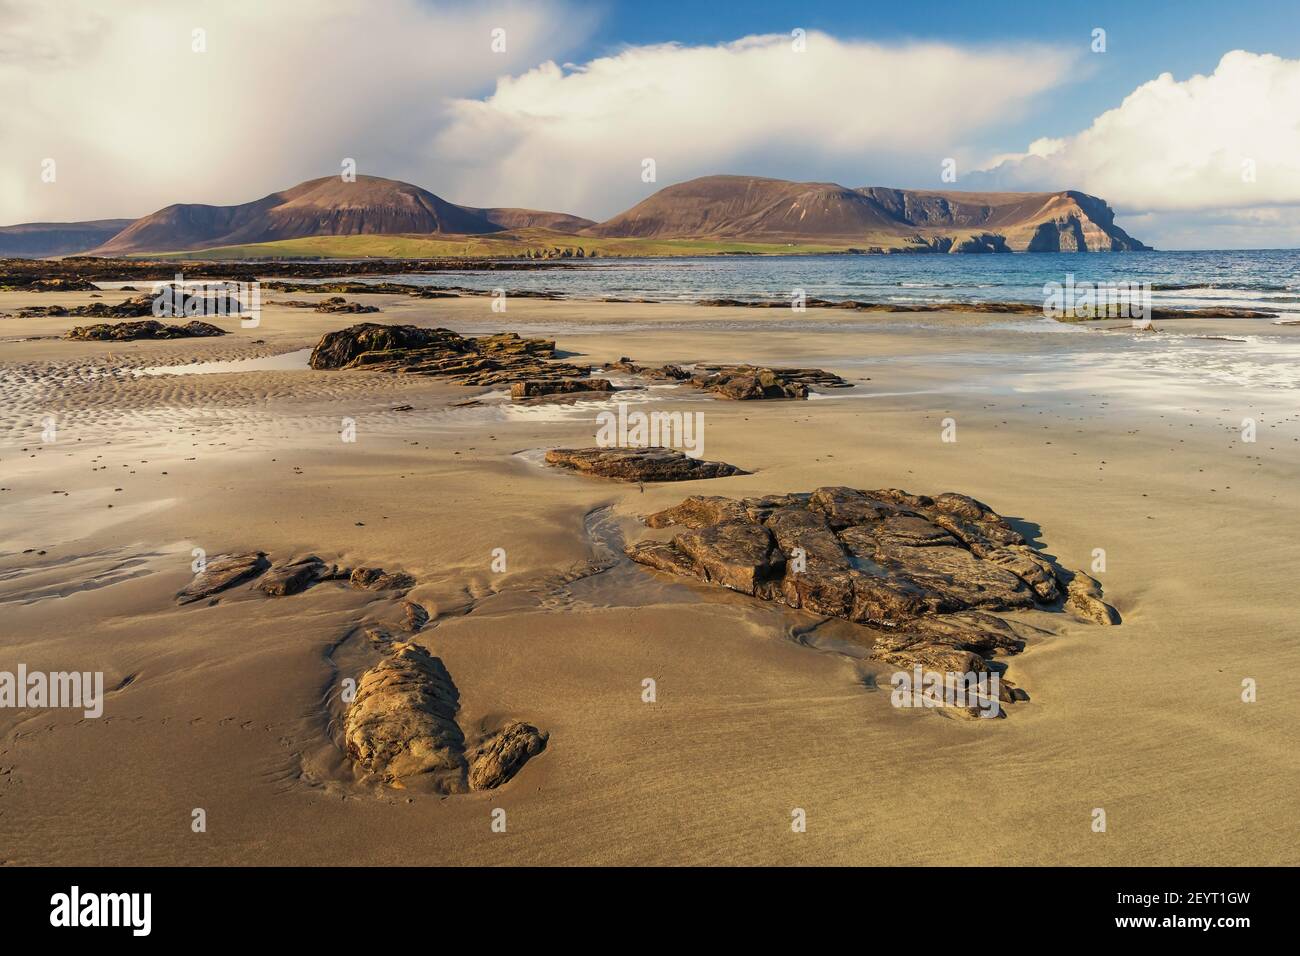 Rocks on sandy scottish beach with big hills and white clouds in background Stock Photo